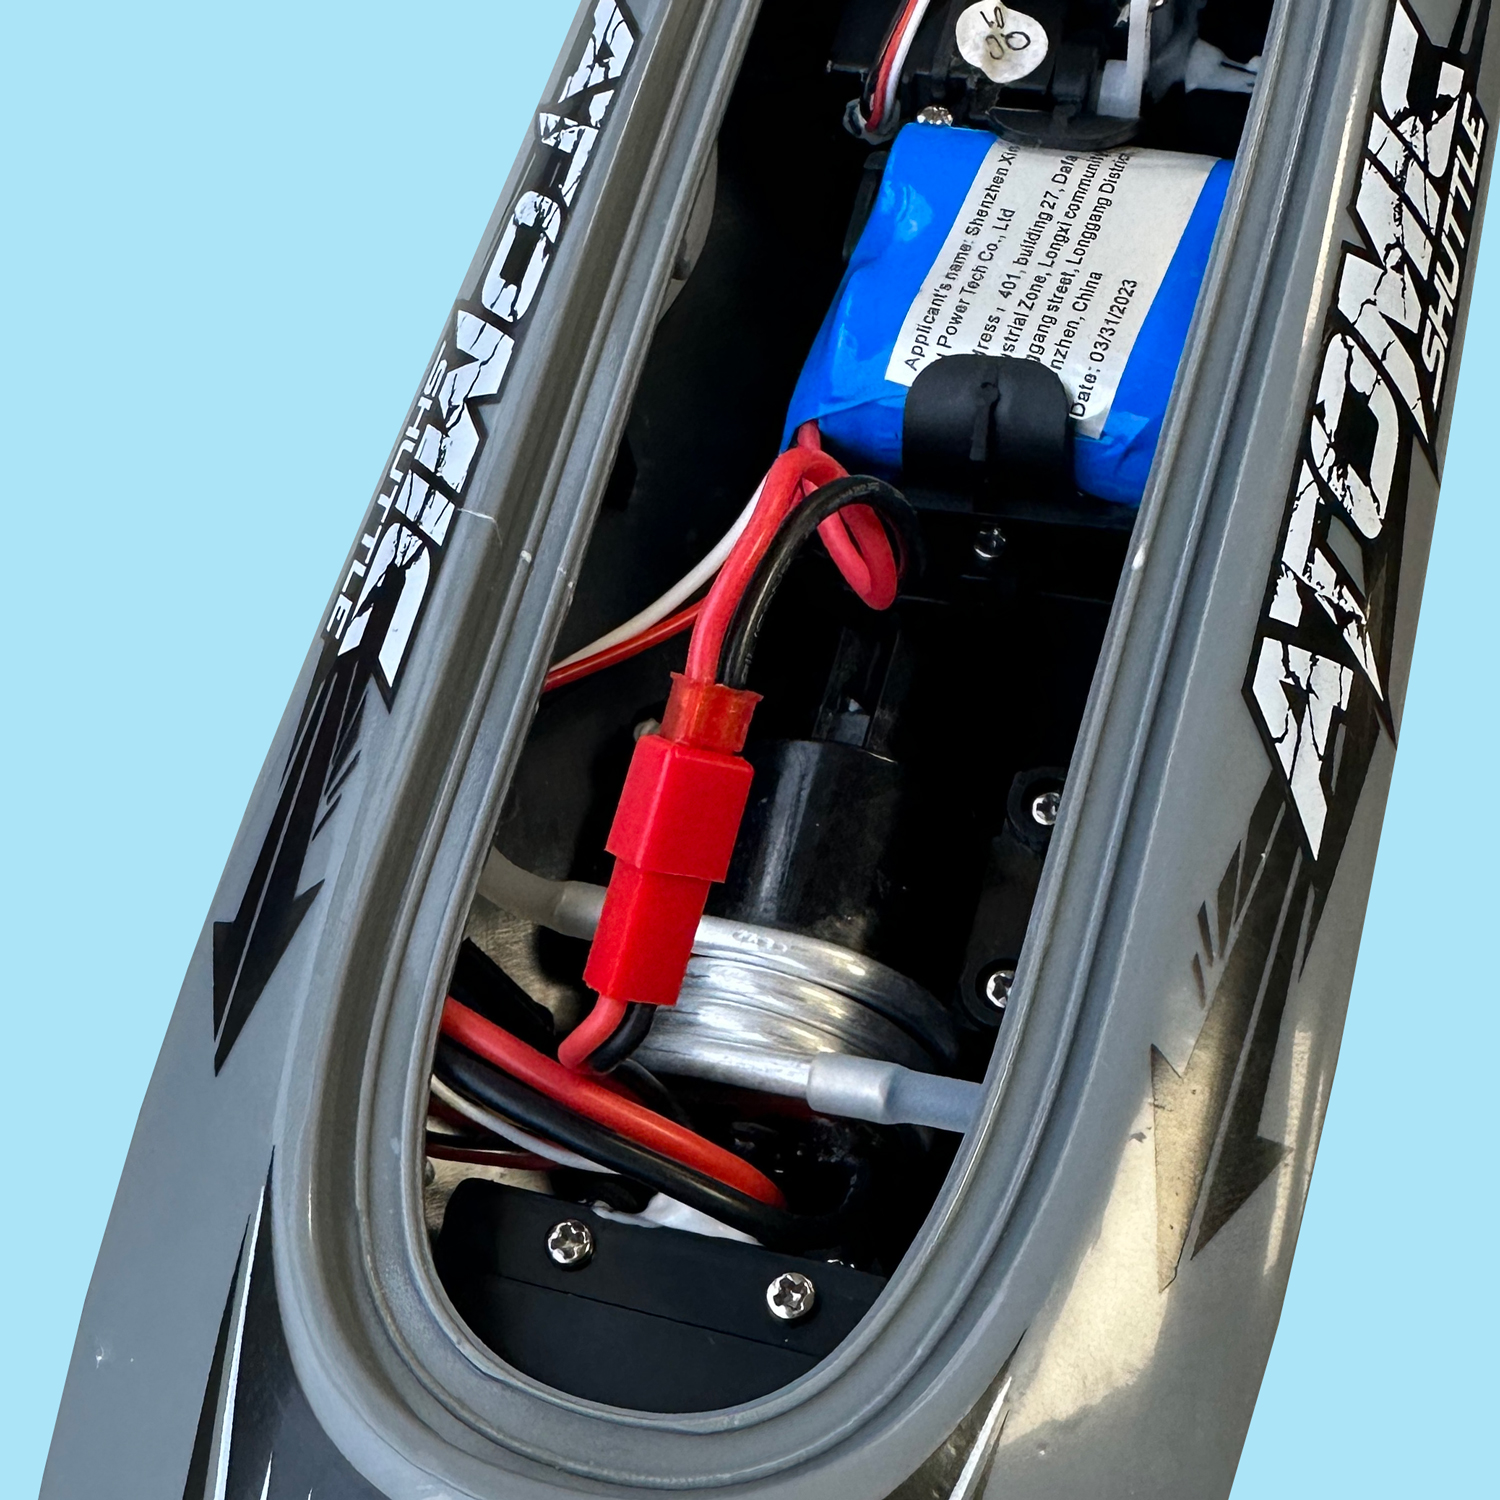 Getting started with the RC Remote Controllable Speedboat